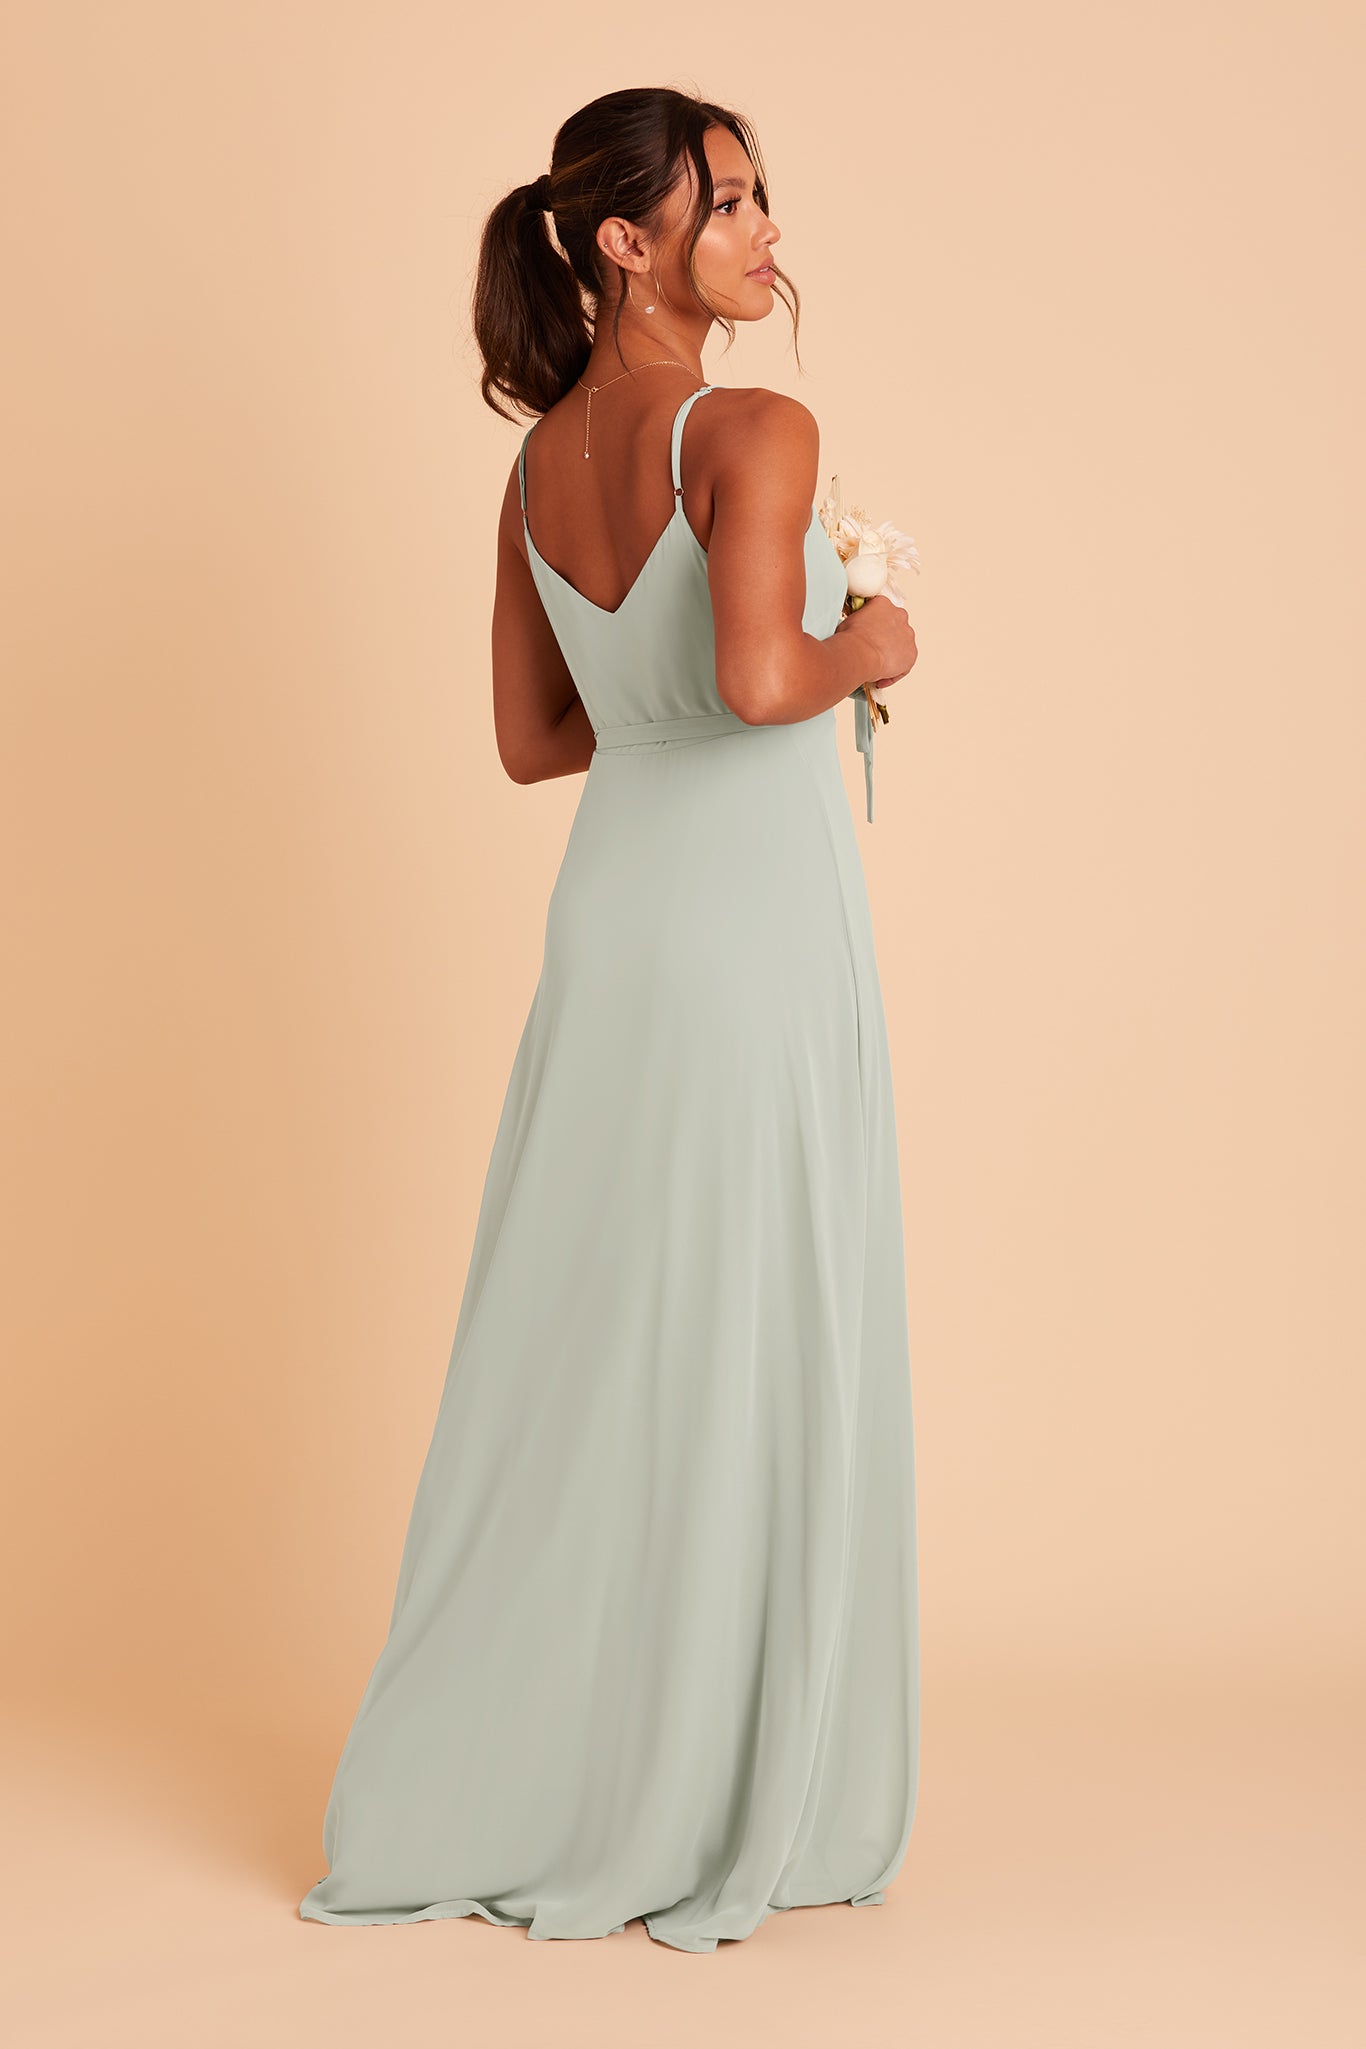 Back view of the Cindy Bridesmaid Dress in sage chiffon reveals adjustable spaghetti straps and a V-shaped cut over the shoulder blades.